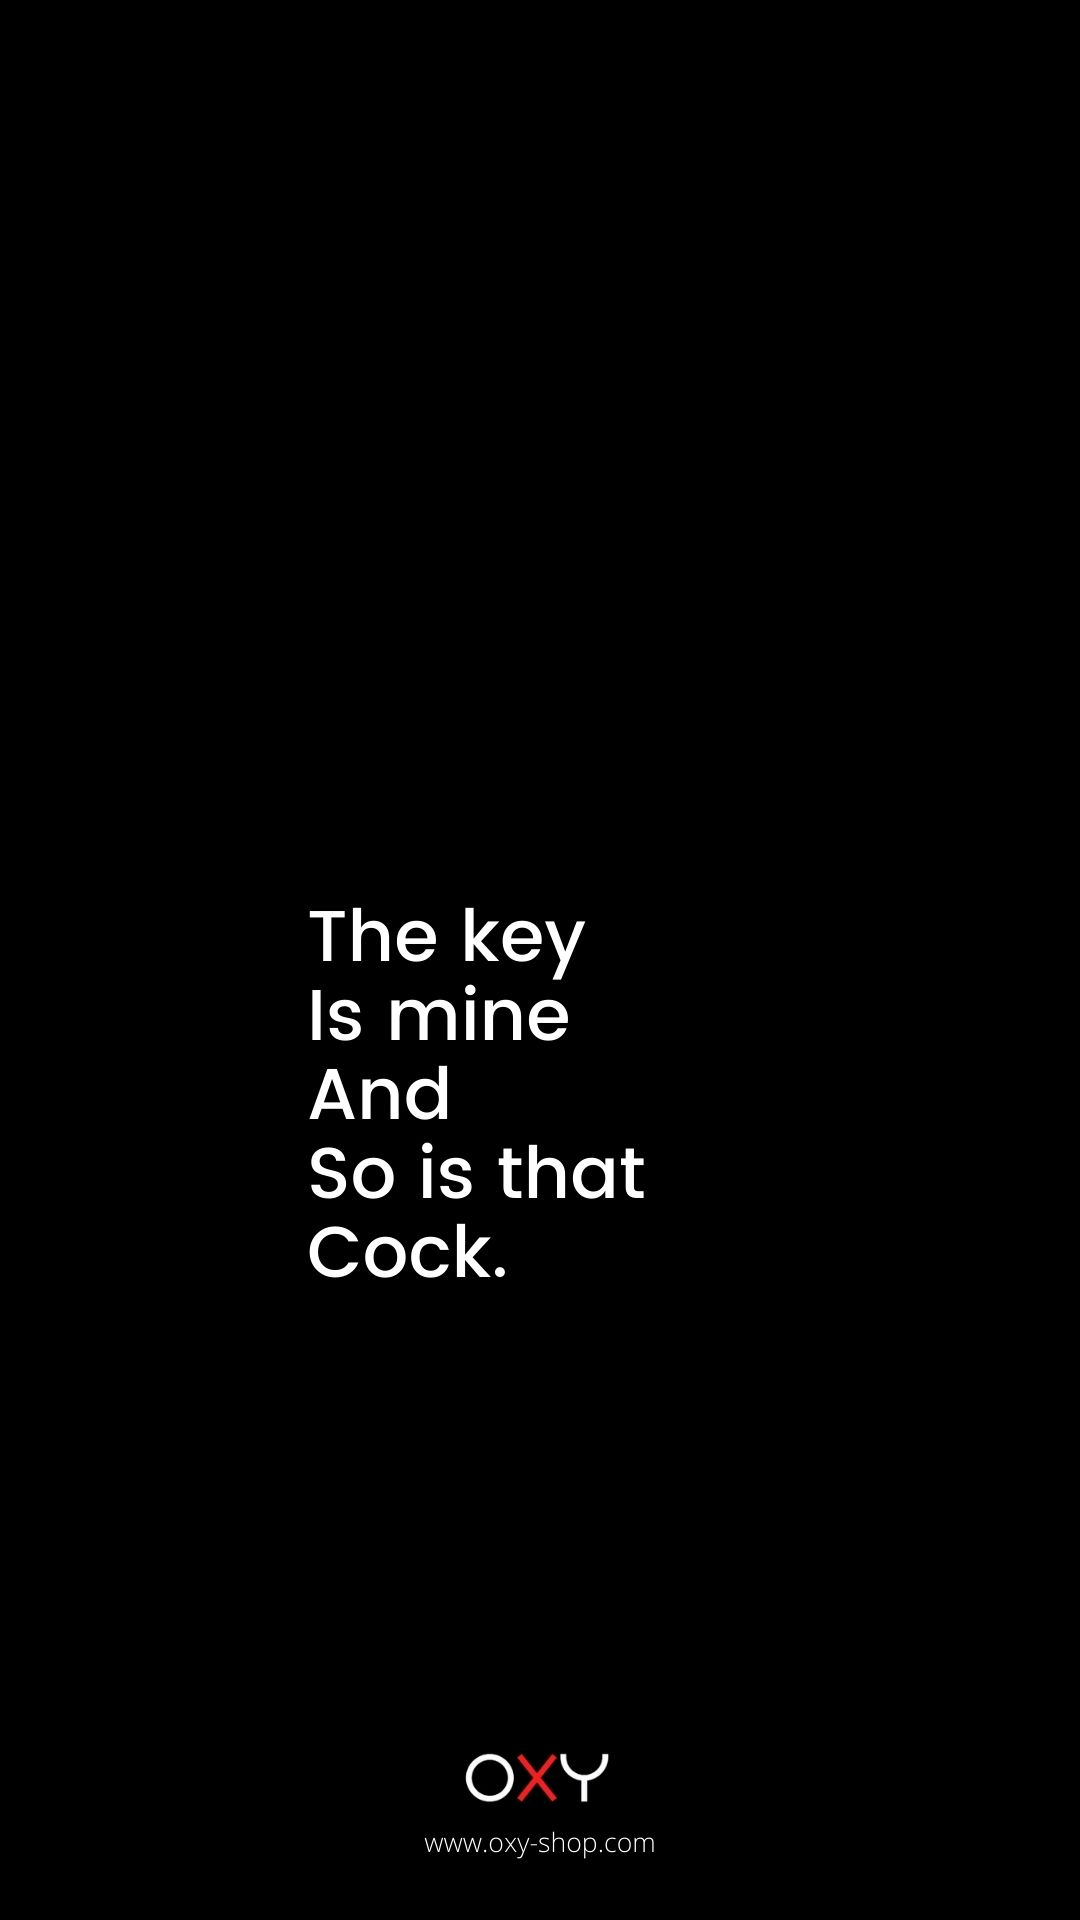 The key is mine and so is that cock. - BDSM wallpaper